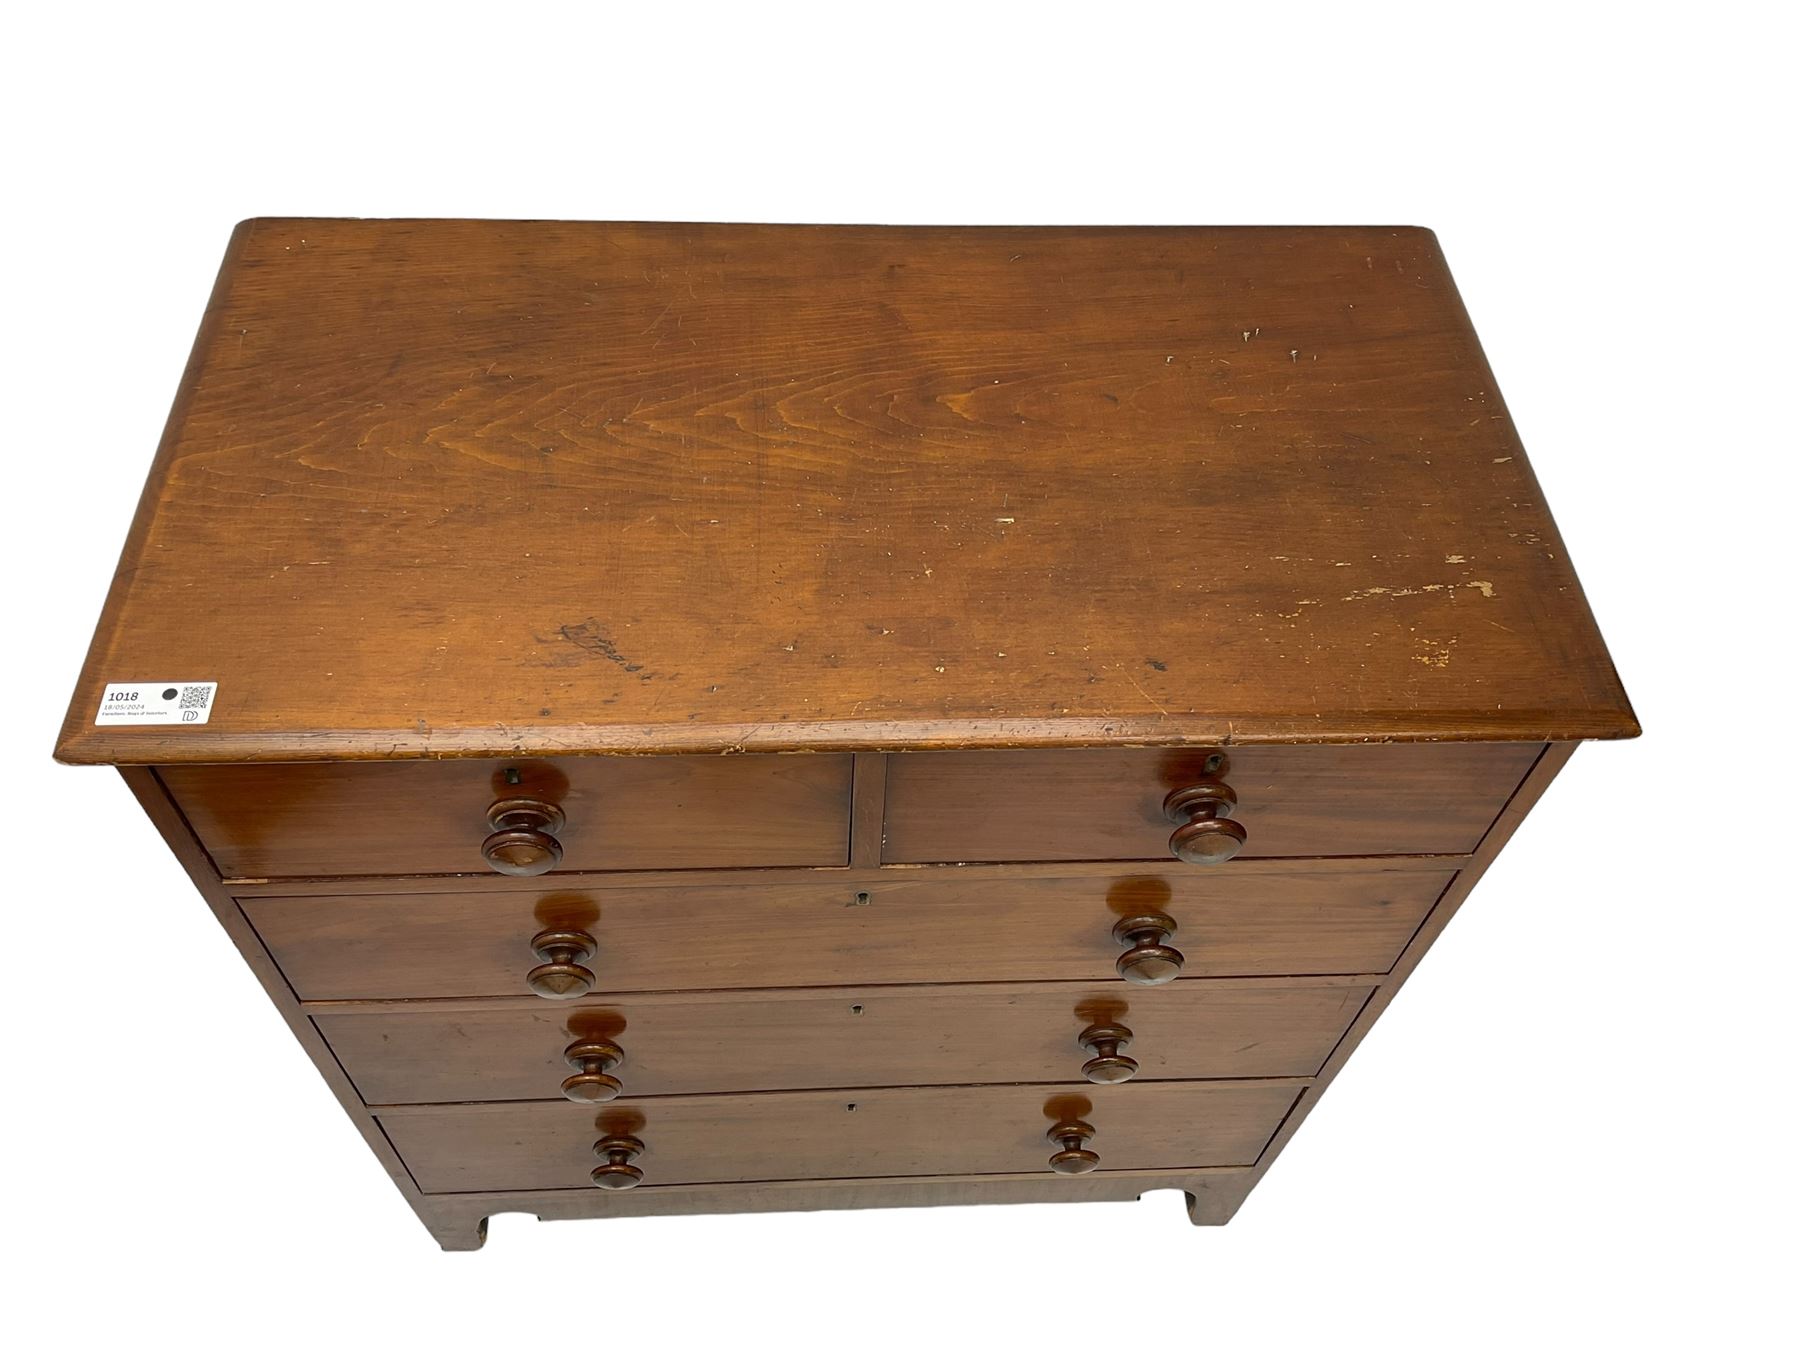 19th century mahogany and pine chest - Image 5 of 8